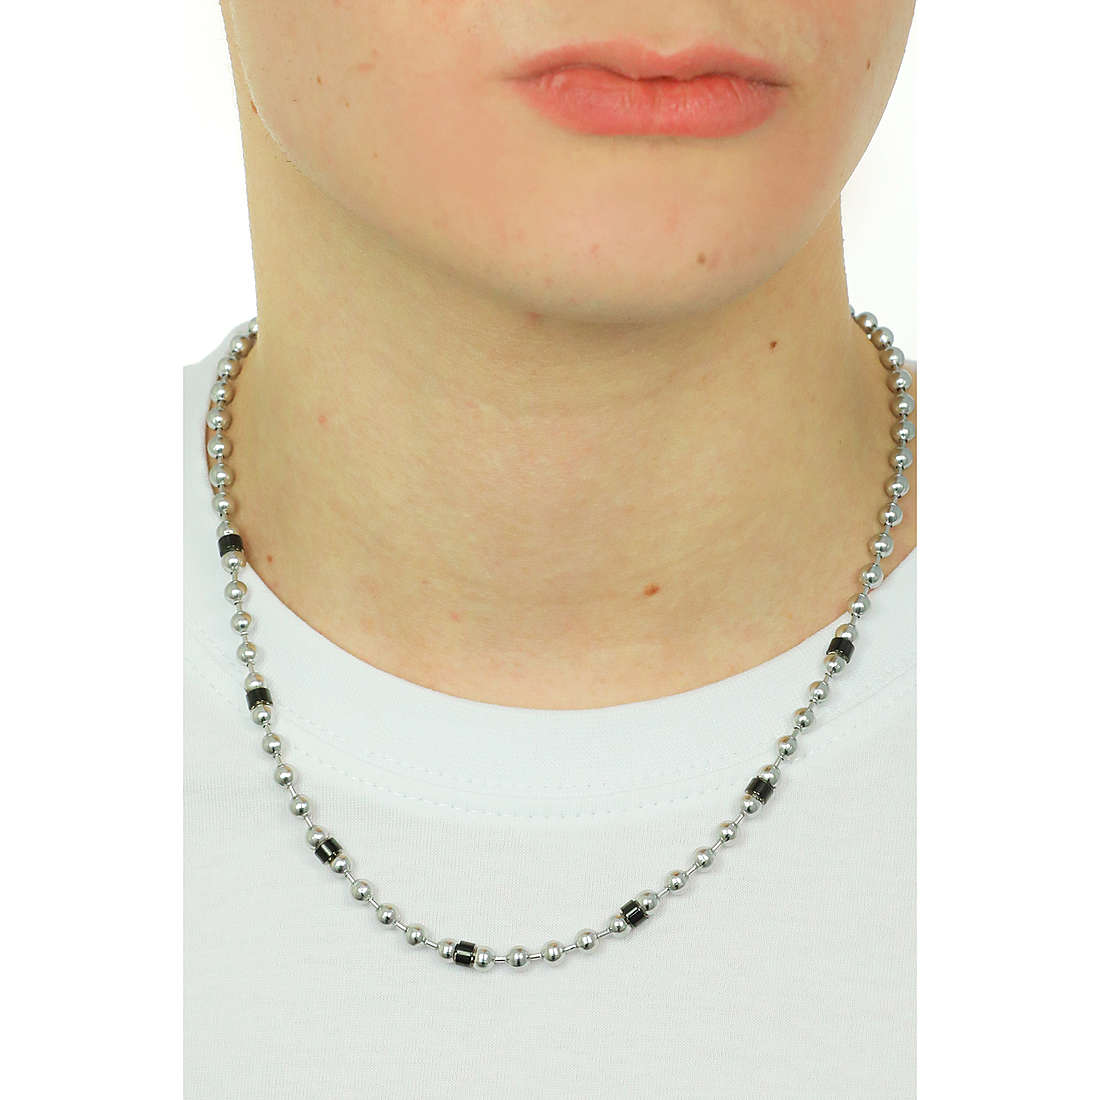 Luca Barra necklaces man CL261 wearing